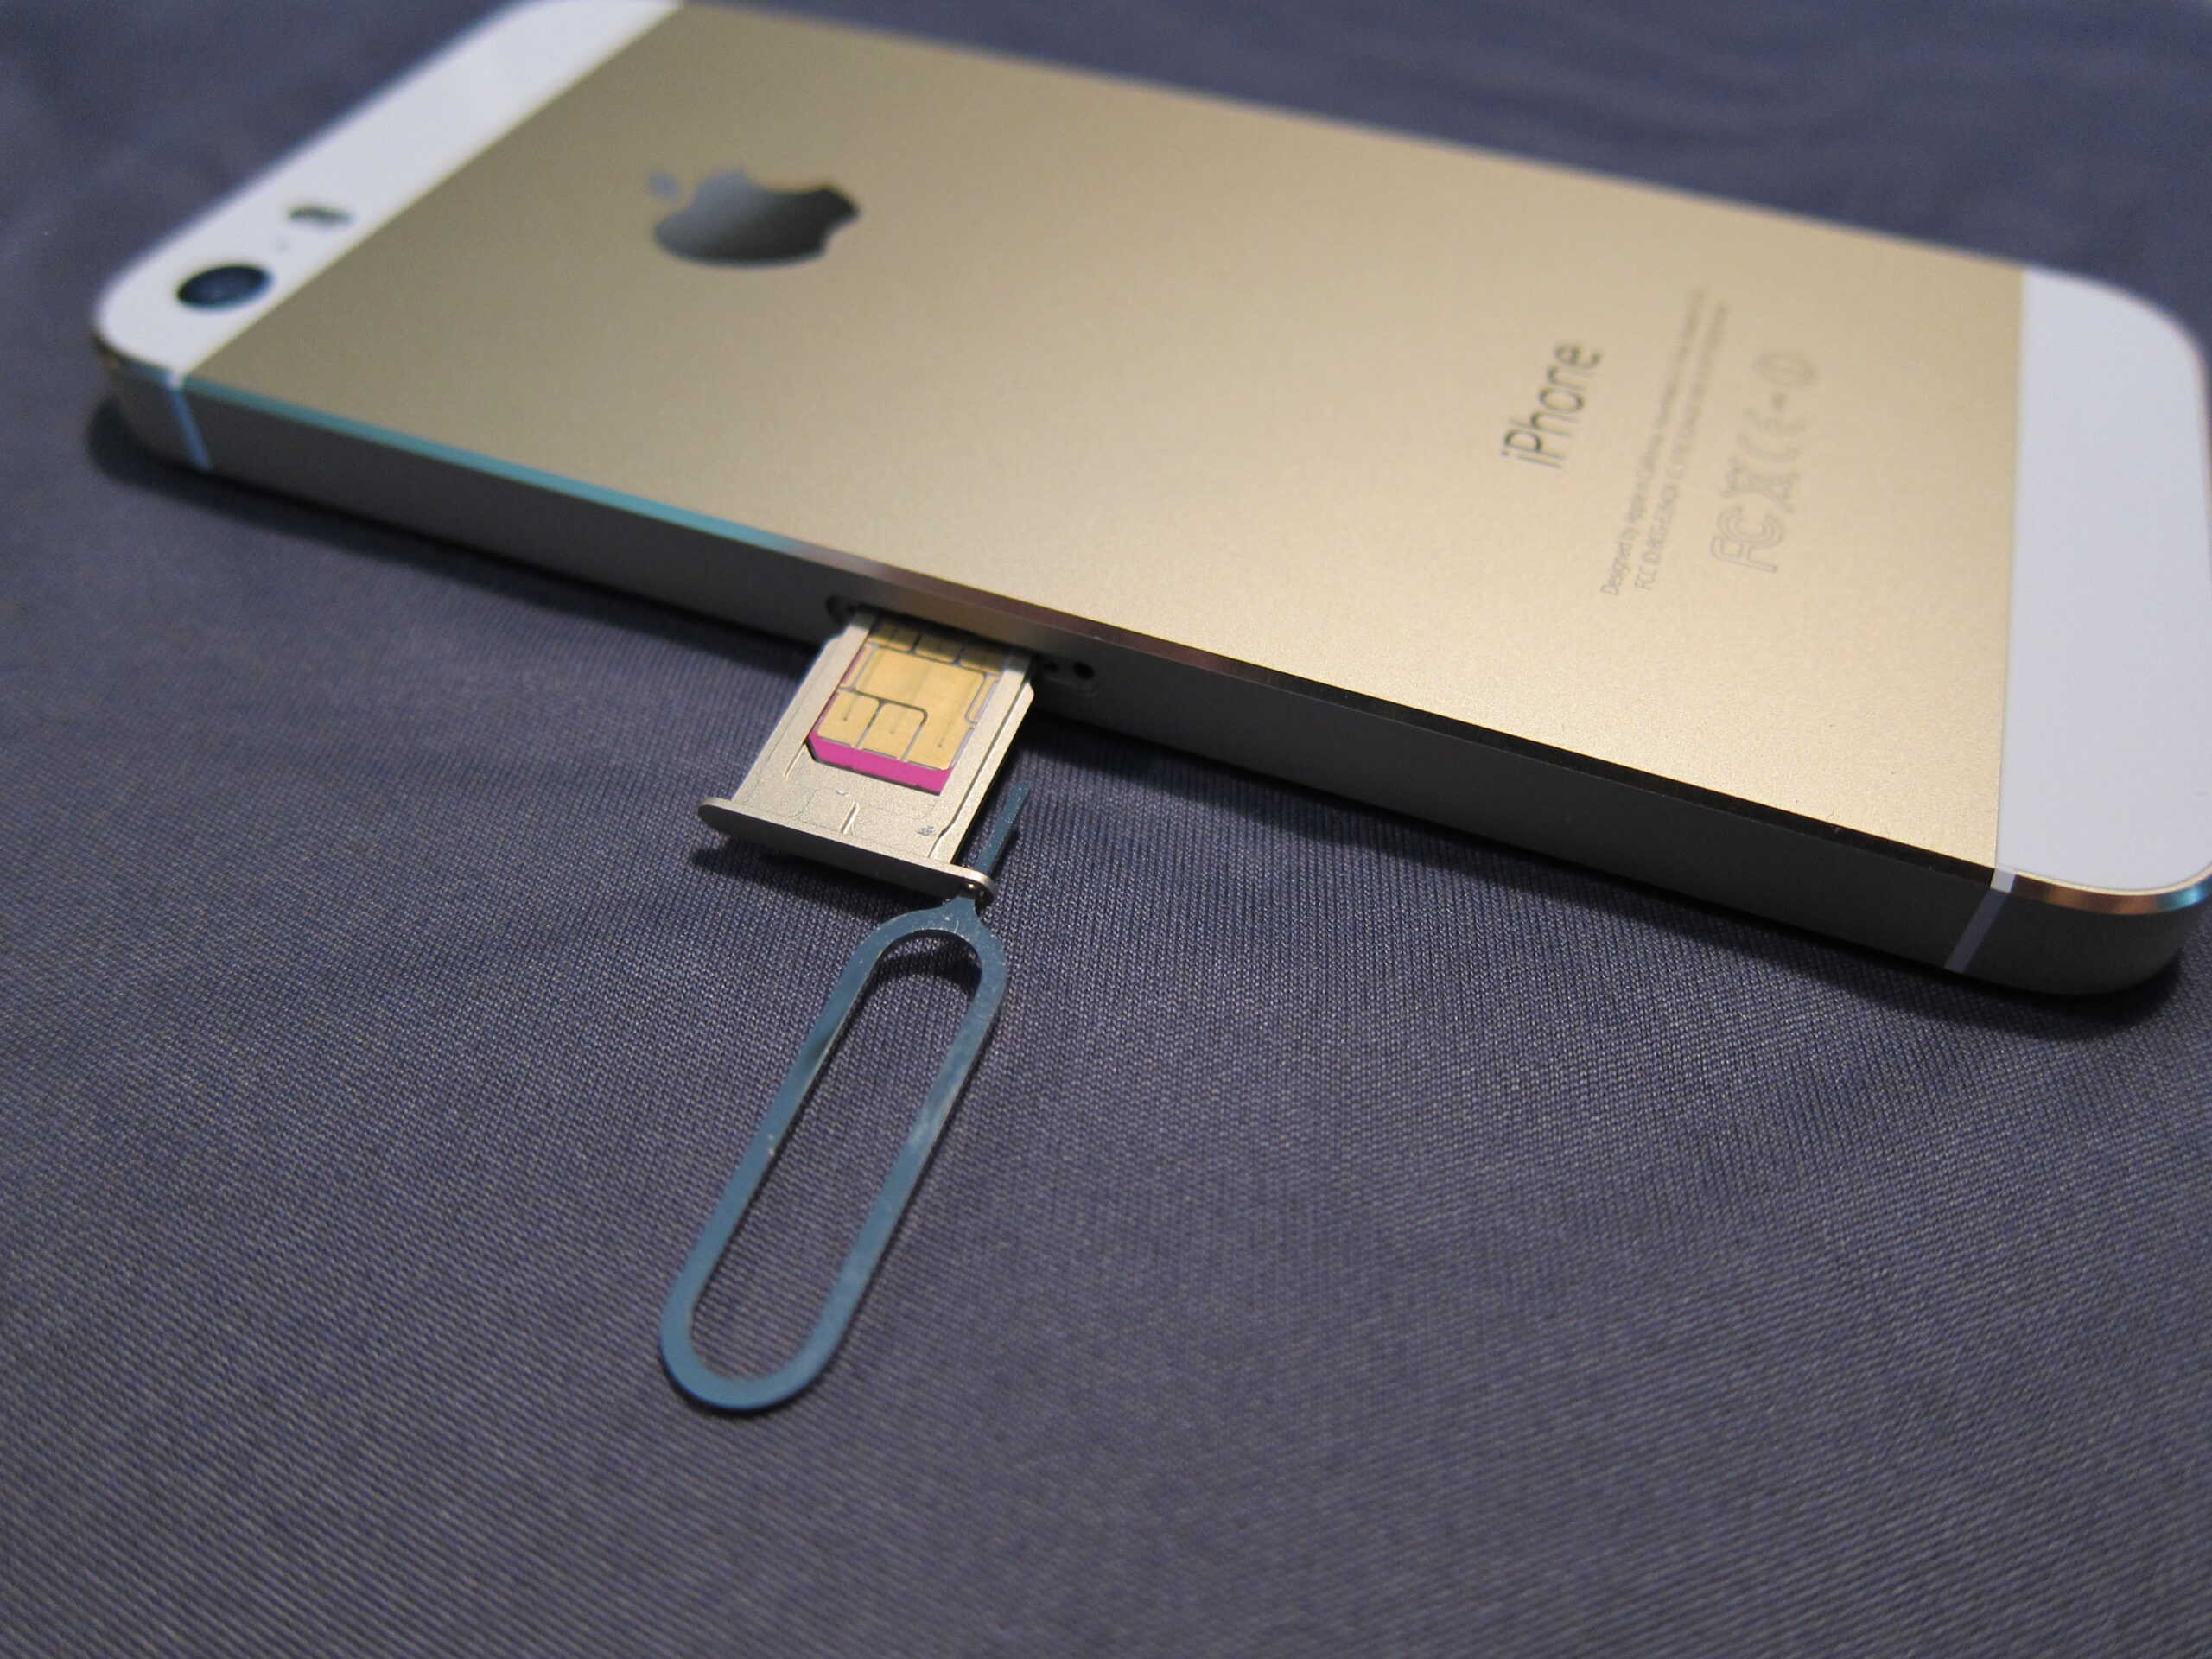 Opening The IPhone SIM Card Slot: Step-by-Step Guide